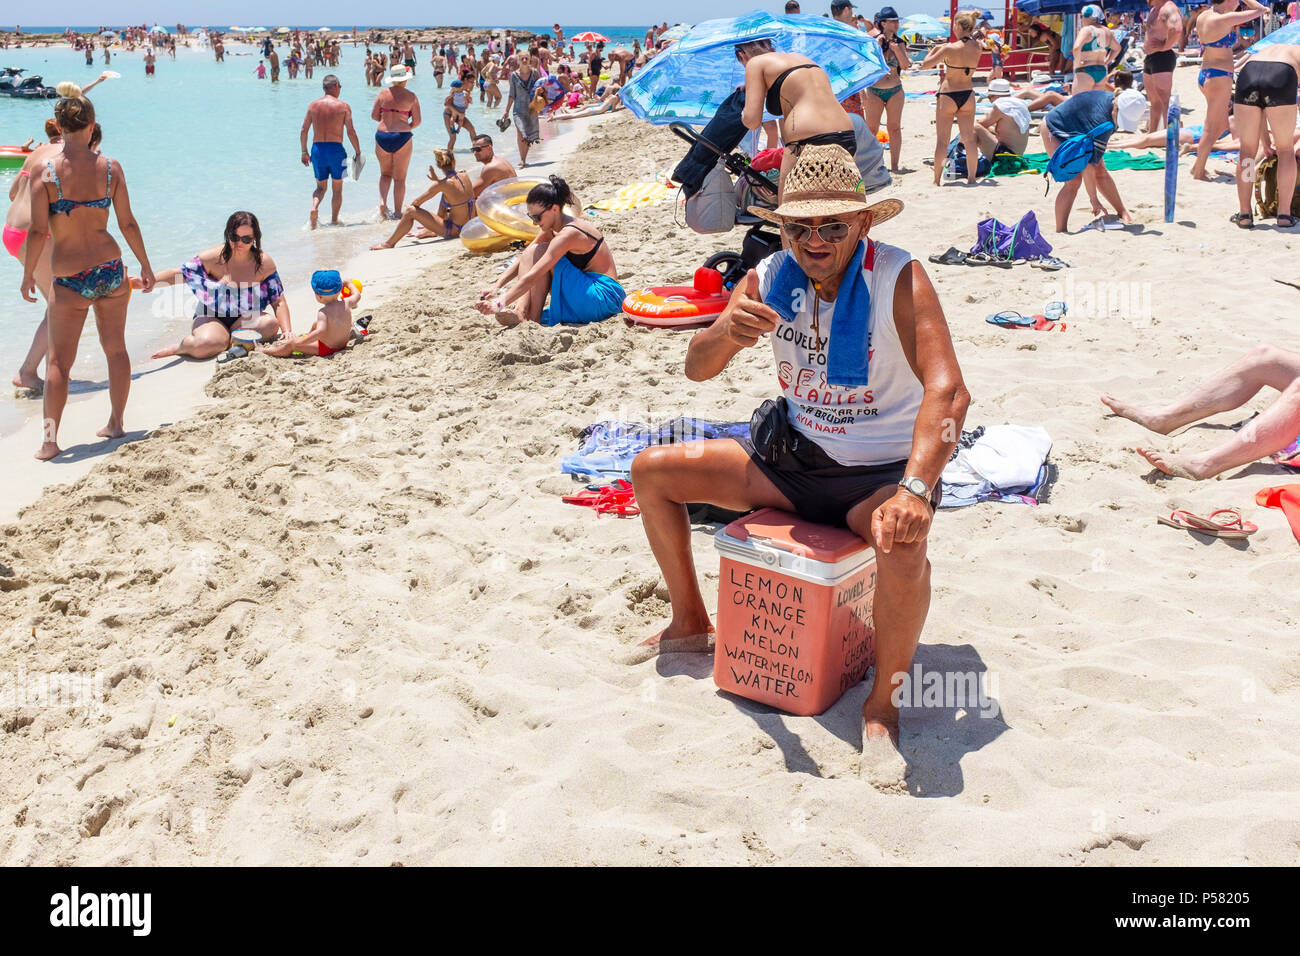 Local man selling fresh fruit and cool drinks from a fridge box, on Nissi beach, near Ayia Napa, Cyprus. Stock Photo